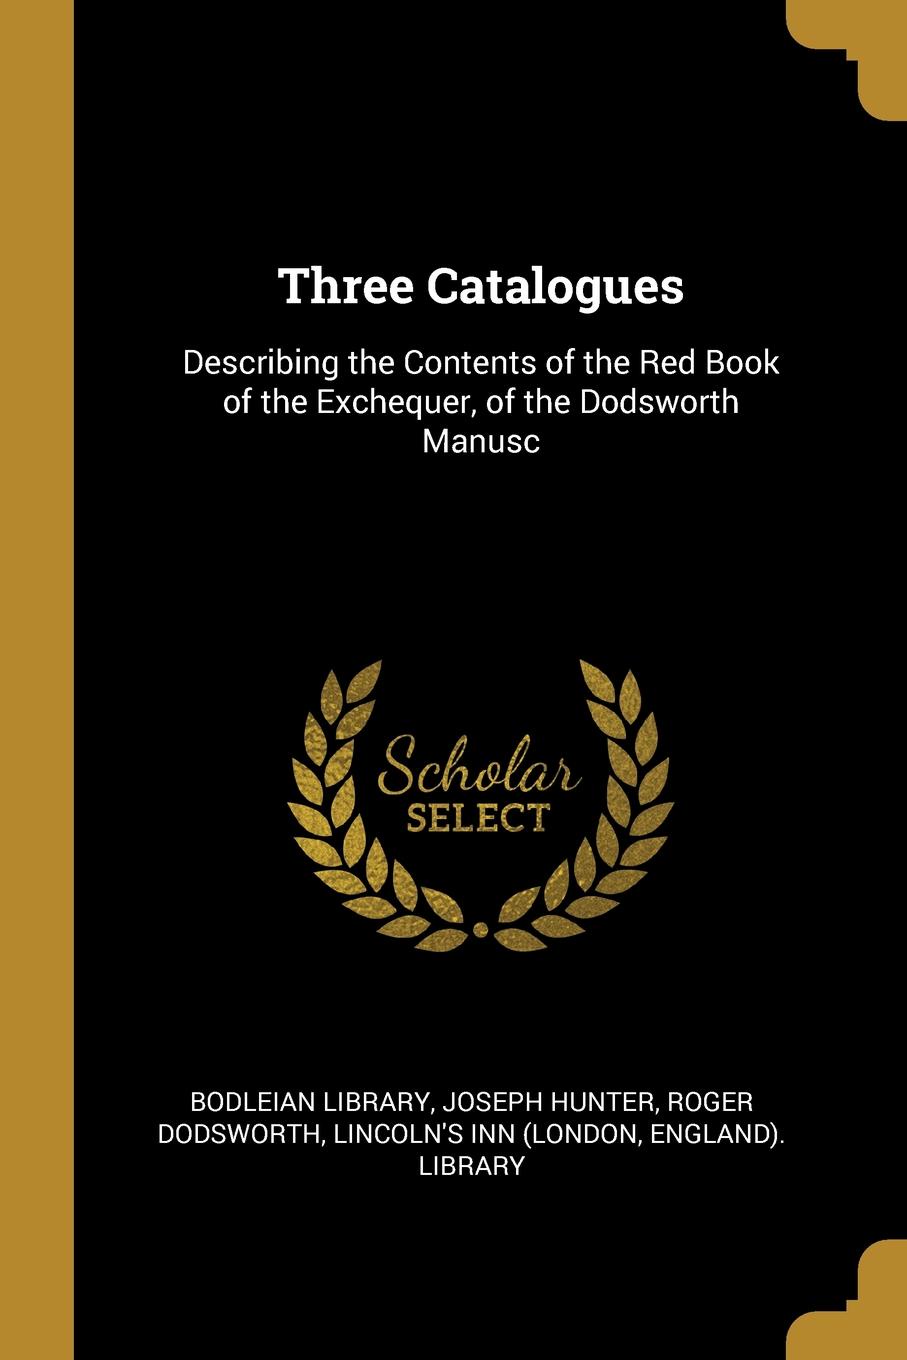 Three Catalogues. Describing the Contents of the Red Book of the Exchequer, of the Dodsworth Manusc